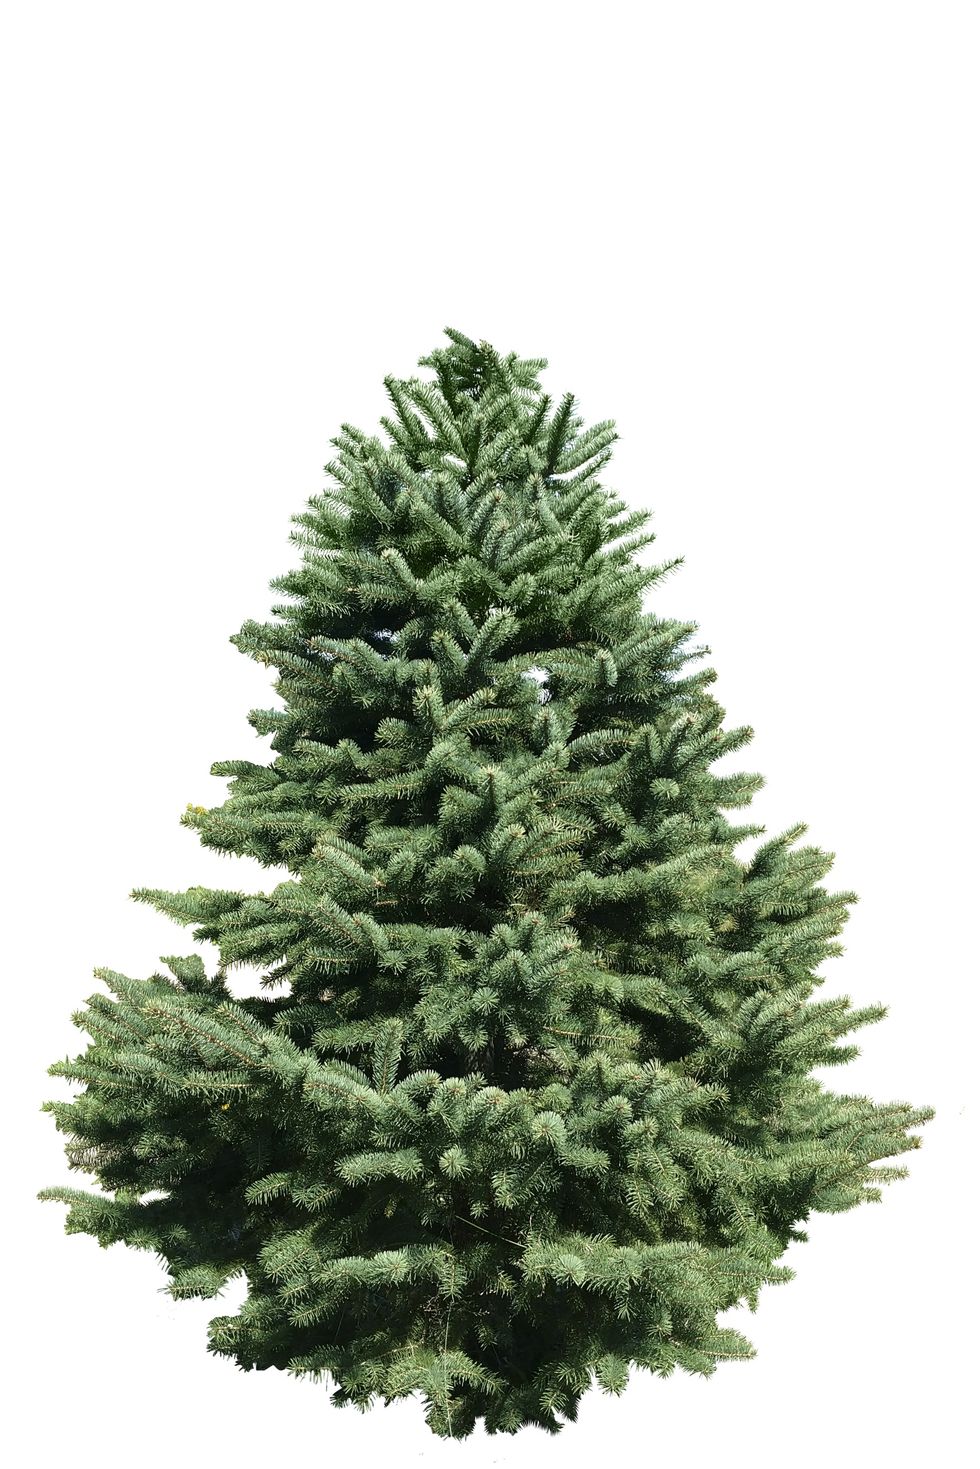 types of Christmas trees white spruce